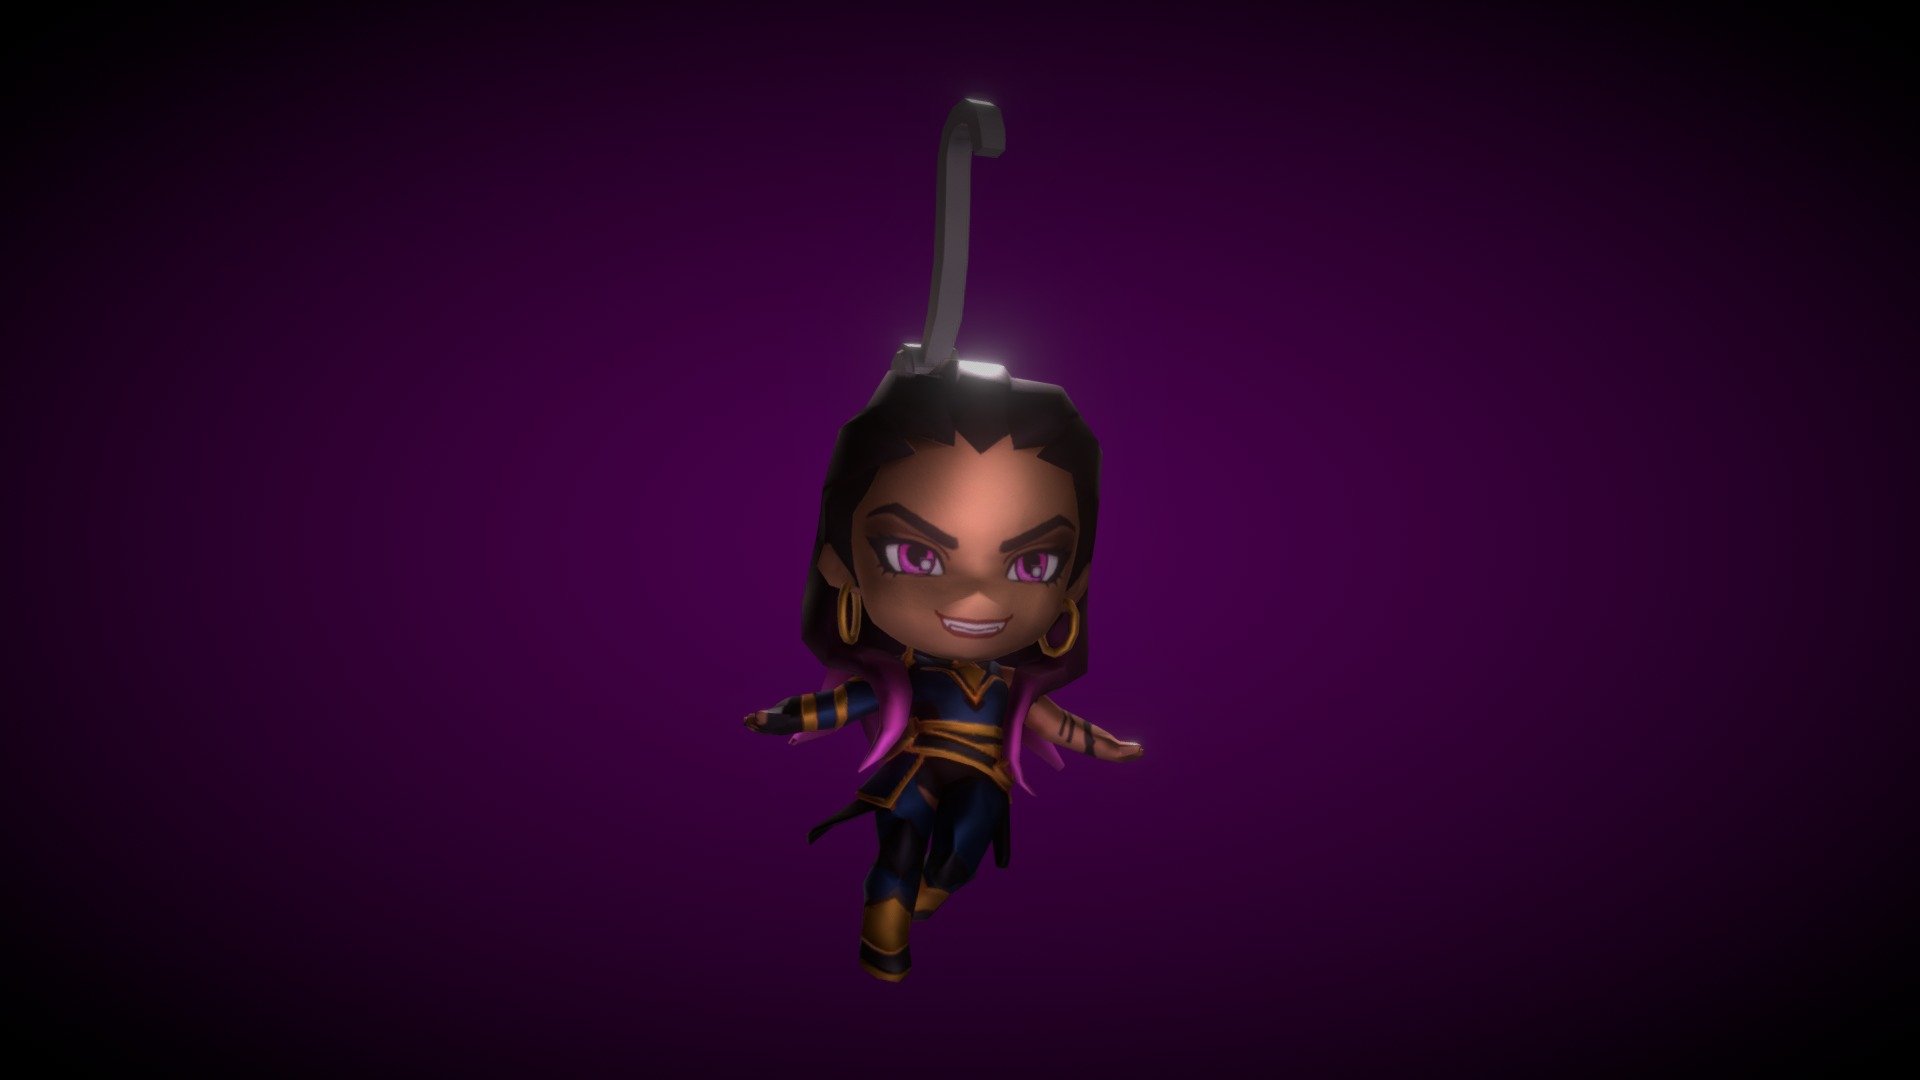 Valorant Chibi Characters Keychain for ingame Guns

Reyna // Valorant - Valorant - Reyna Chibi (Keychain) - Download Free 3D model by Luquita (@speedmodel) 3d model